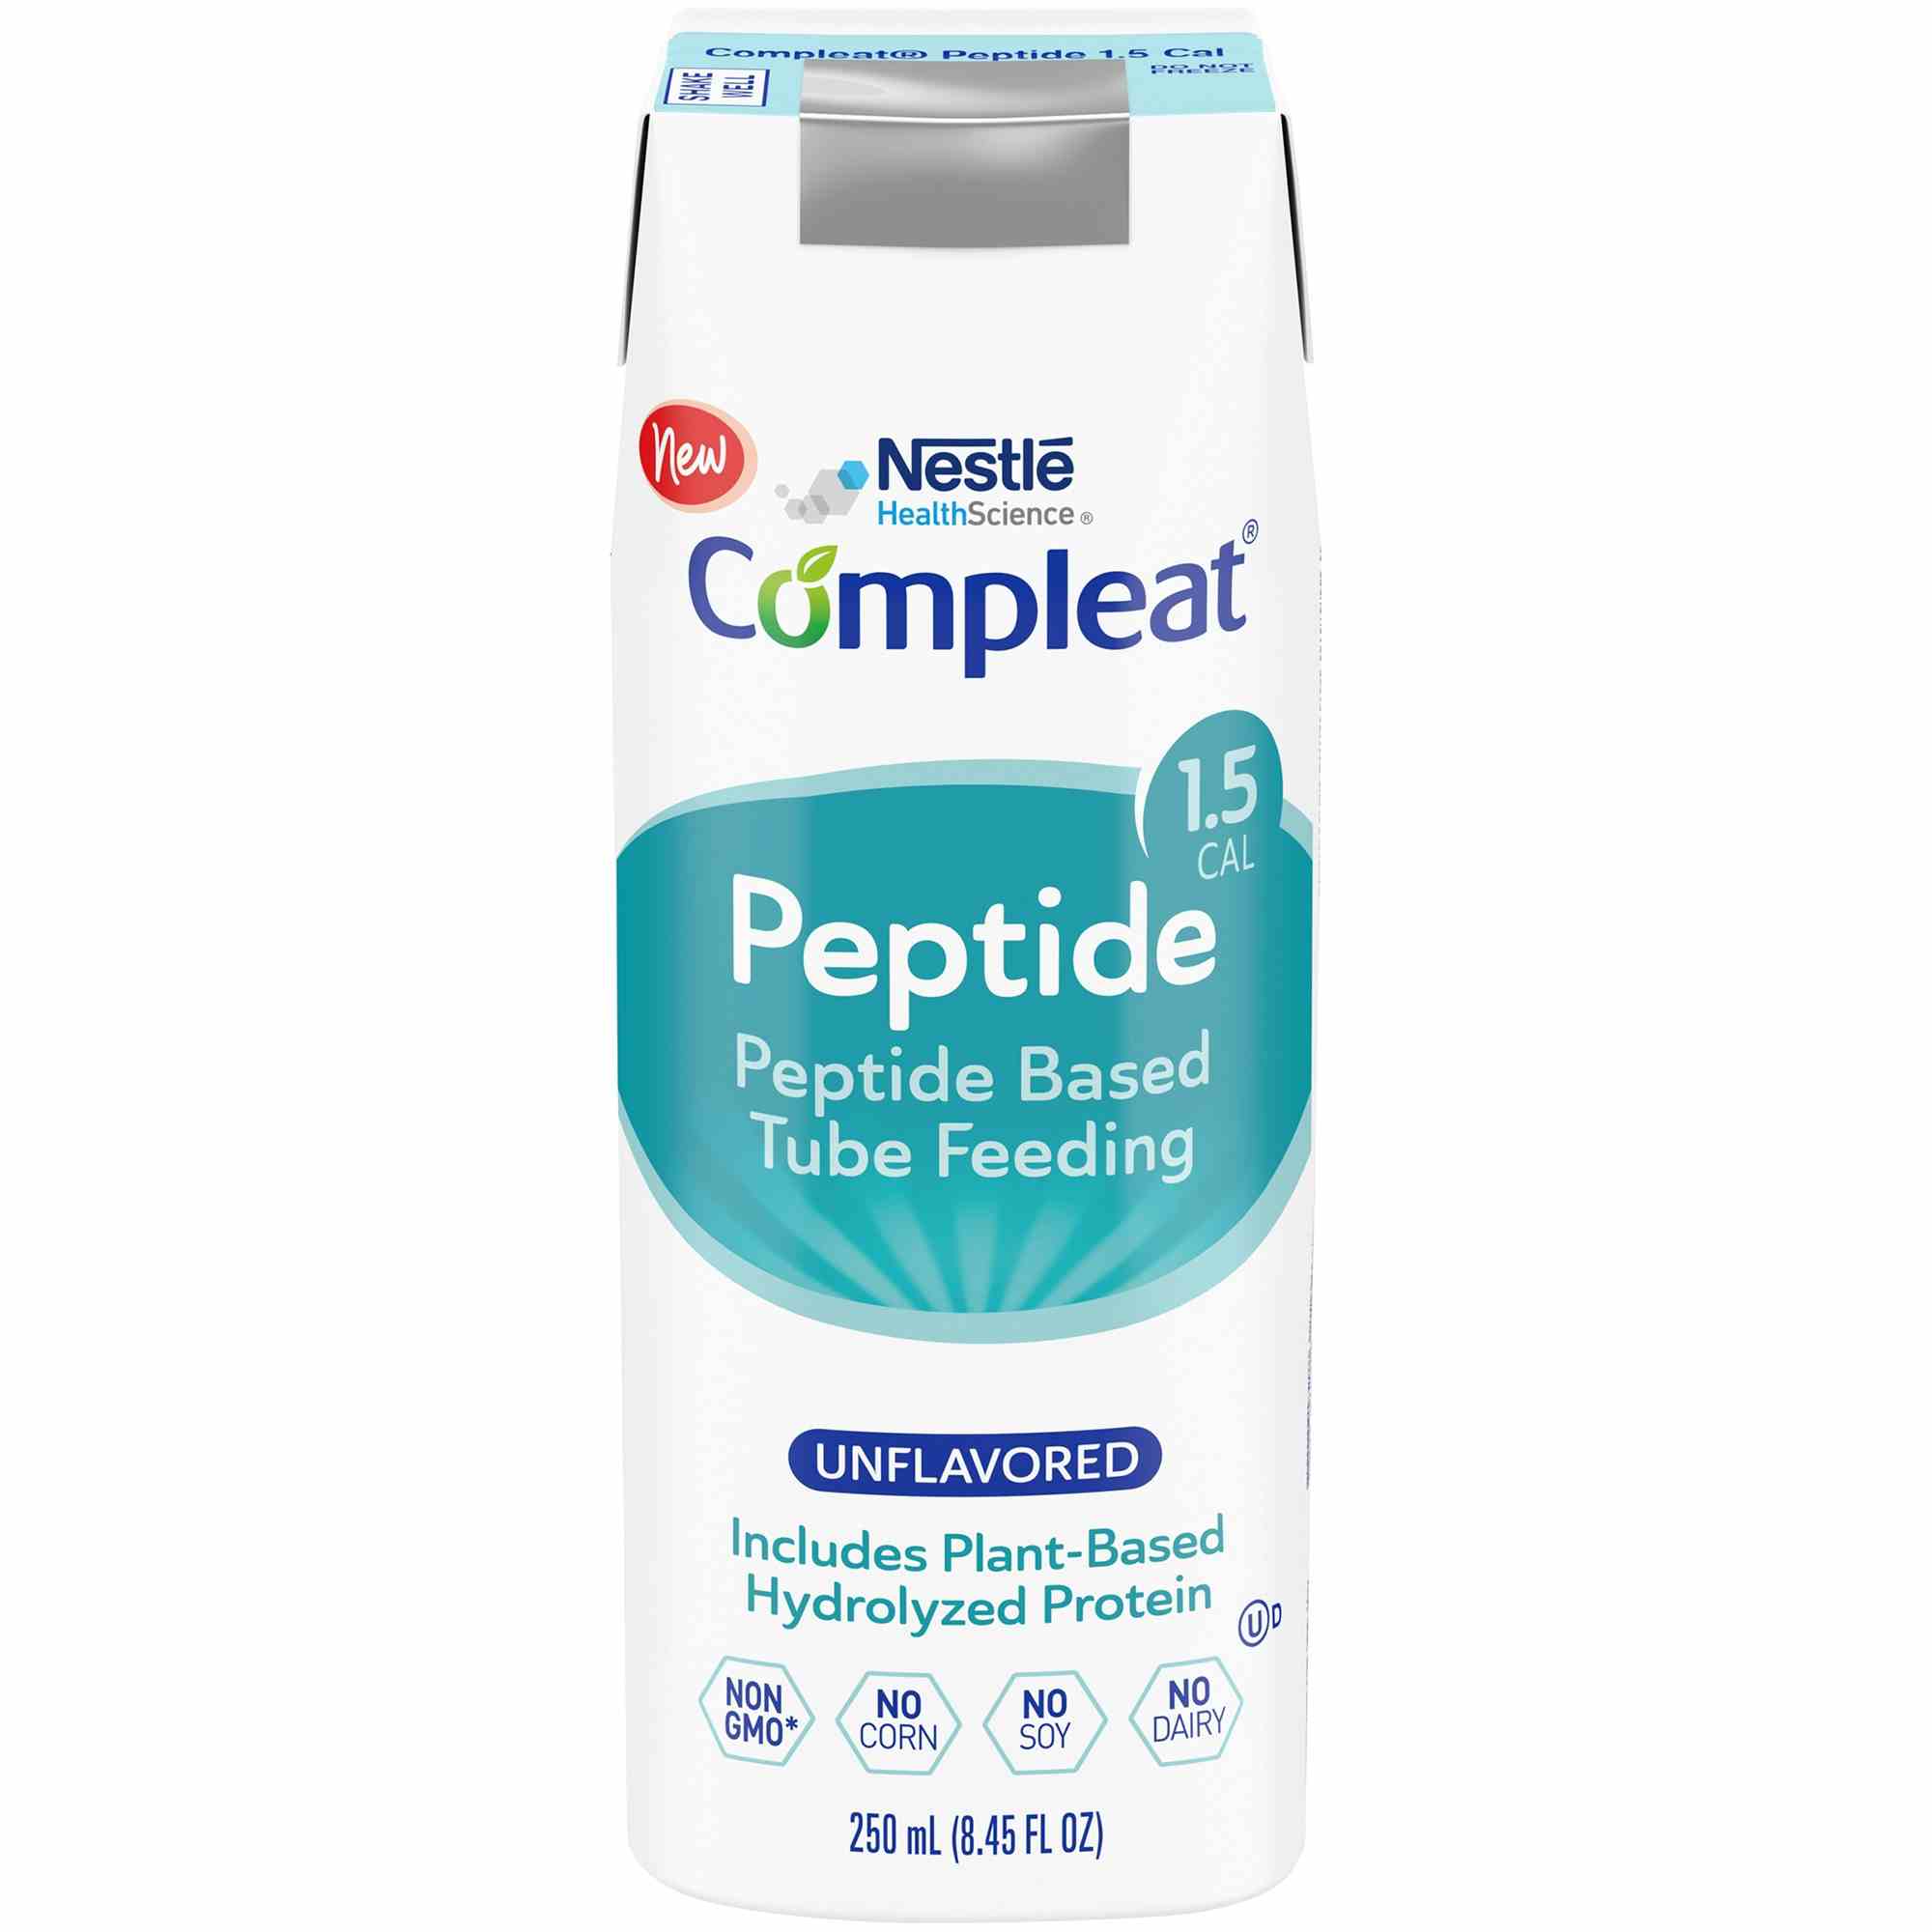 Compleat Peptide Ready to Use Oral Supplement/Tube Feeding Formula, Unflavored Carton, 4390076283, Case of 24 Cartons